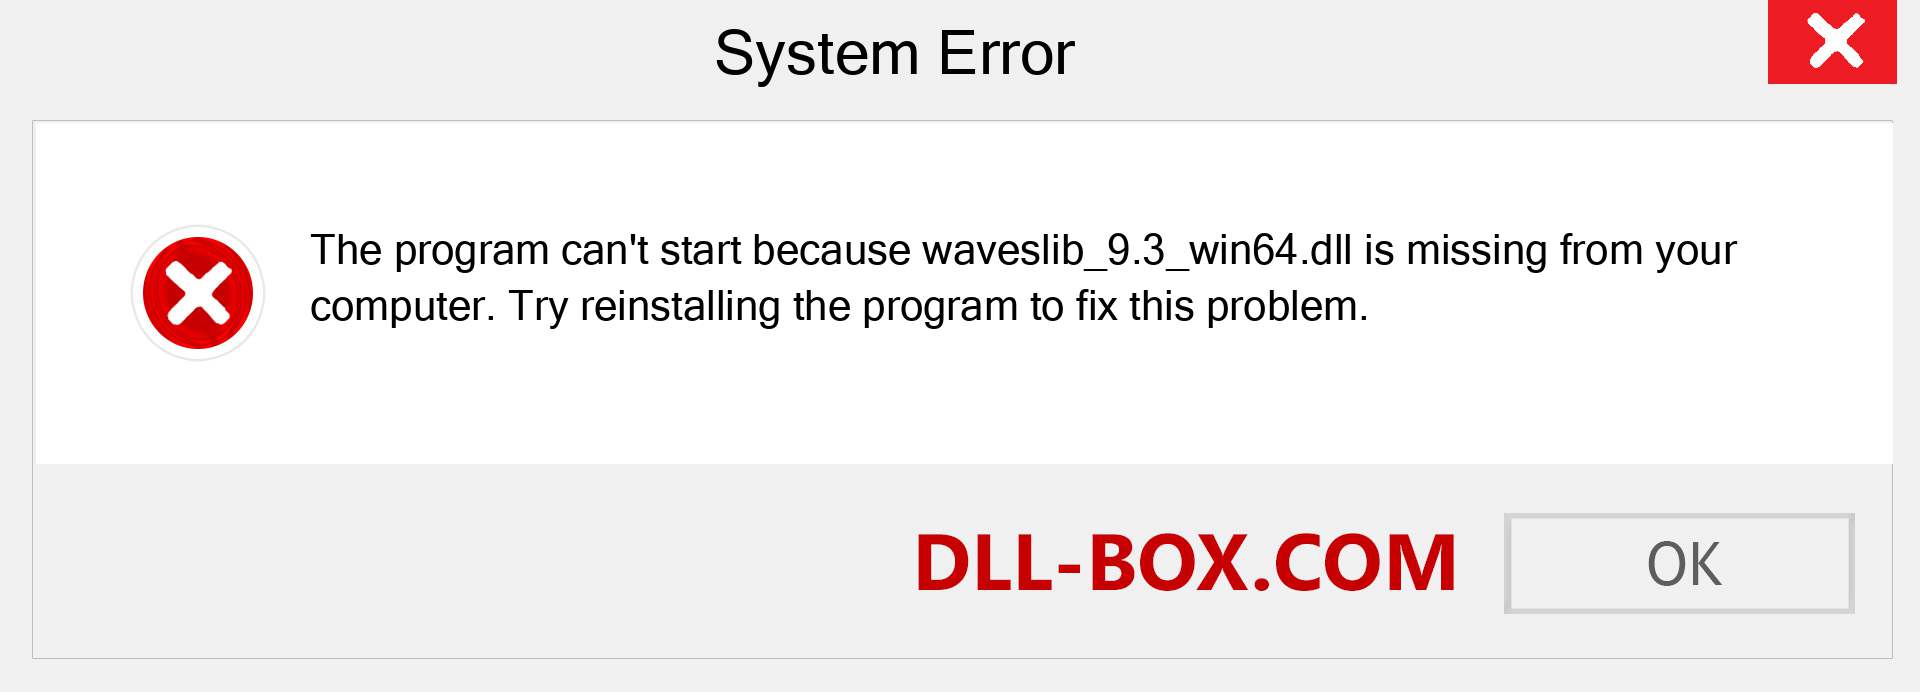  waveslib_9.3_win64.dll file is missing?. Download for Windows 7, 8, 10 - Fix  waveslib_9.3_win64 dll Missing Error on Windows, photos, images